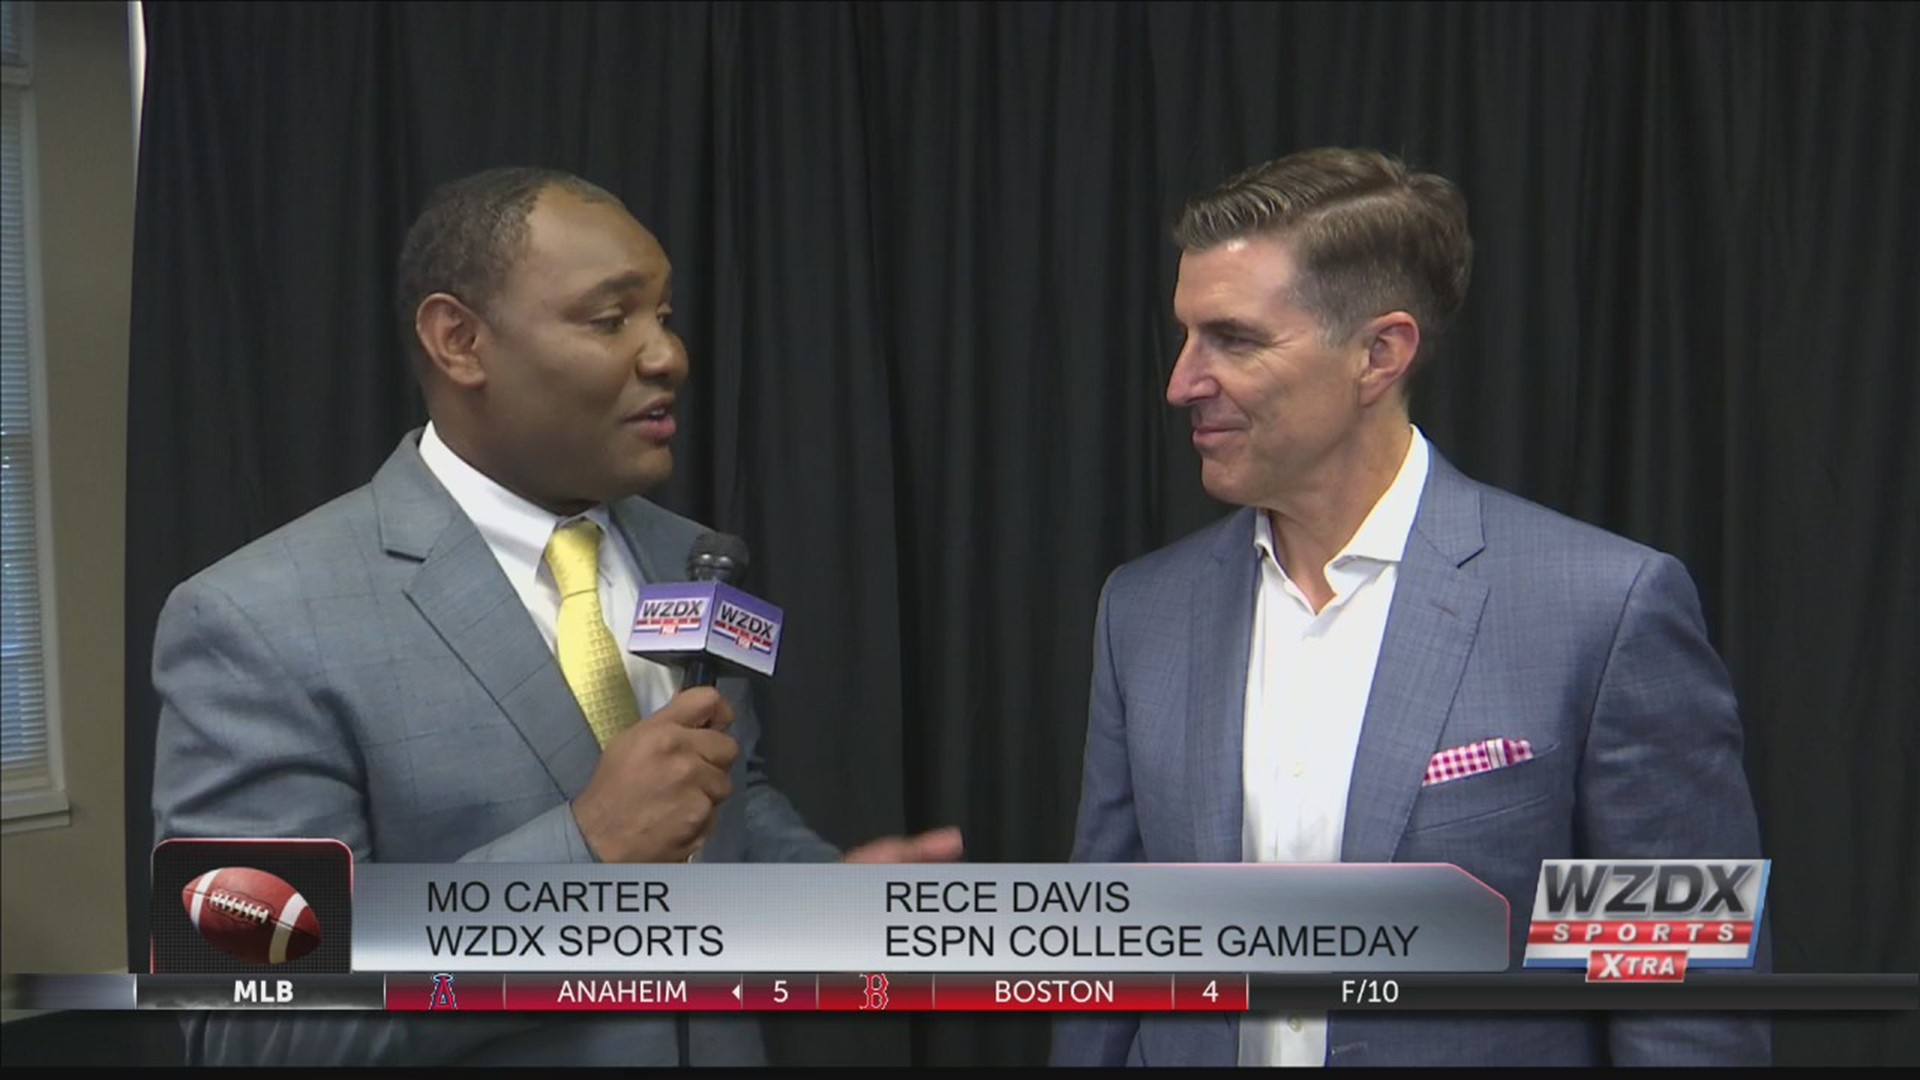 Sports Director Mo Carter caught up with ESPN College Gameday host Rece Davis this week. The Muscle Shoals native gave a season preview about Alabama, Auburn and Tennessee